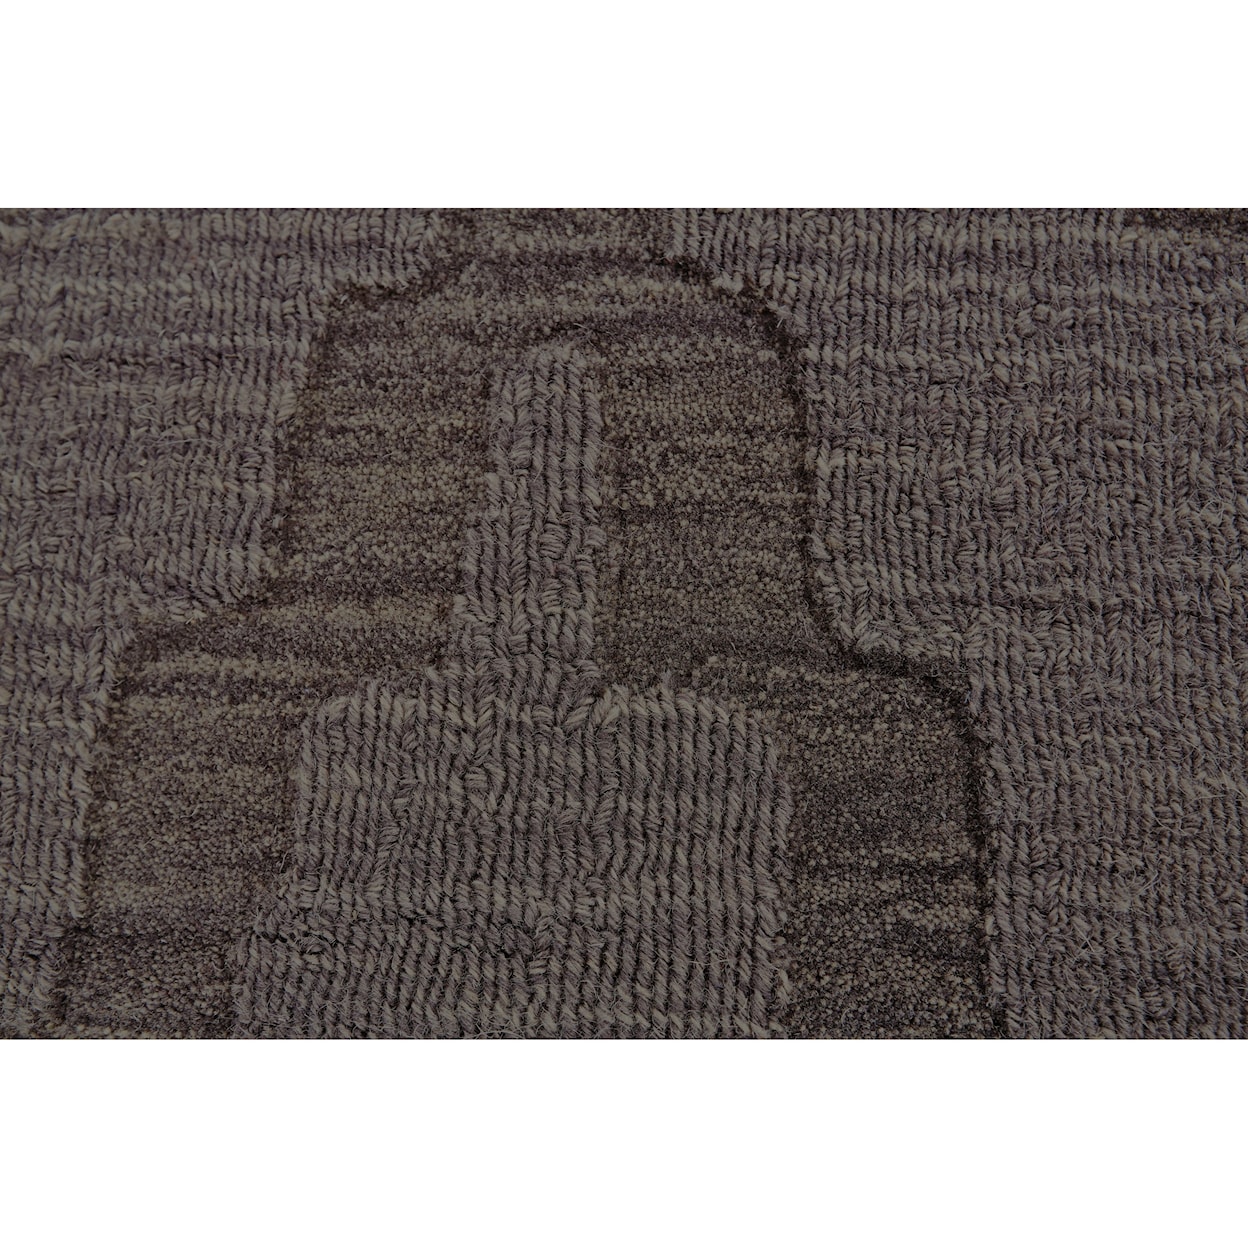 Feizy Rugs Soma Charcoal 9'-6" x 13'-6" Area Rug